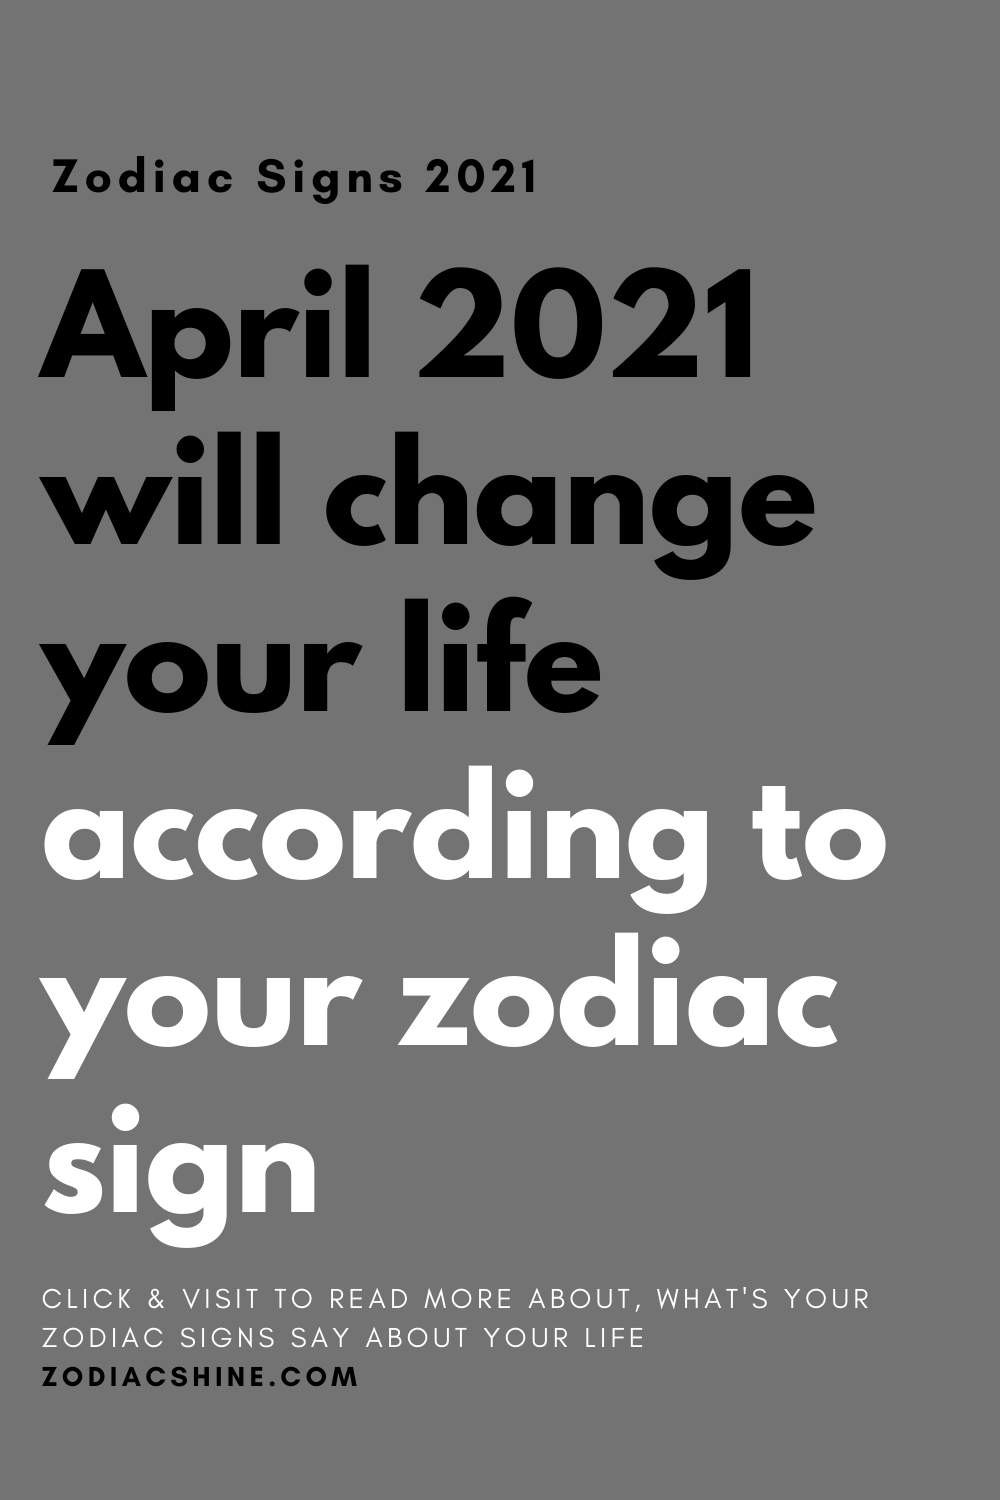 April 2021 will change your life according to your zodiac sign